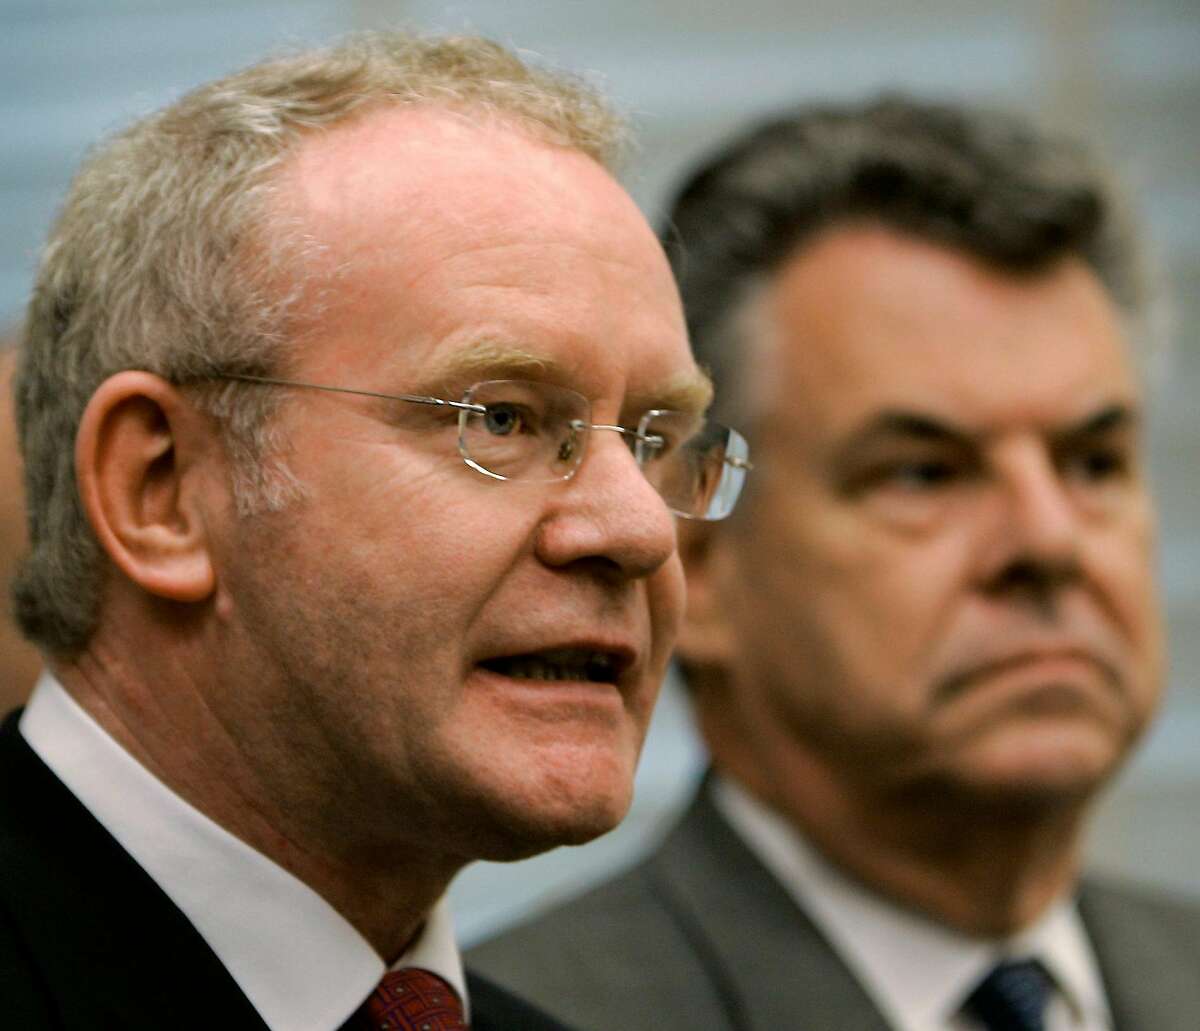 Sinn Fein's deputy leader and chief negotiator Martin McGuinness, center, comments to reporters and lawmakers about the Irish Republican Army's announcement that they will abandon their "armed campaign" and resume disarmament in a declaration designed to revive Northern Ireland's peace process, on Capitol Hill, in Washington, Thursday, July 28, 2005. McGuinness is joined at by Rep. Peter King, R-NY, at right. (AP Photo/J. Scott Applewhite)